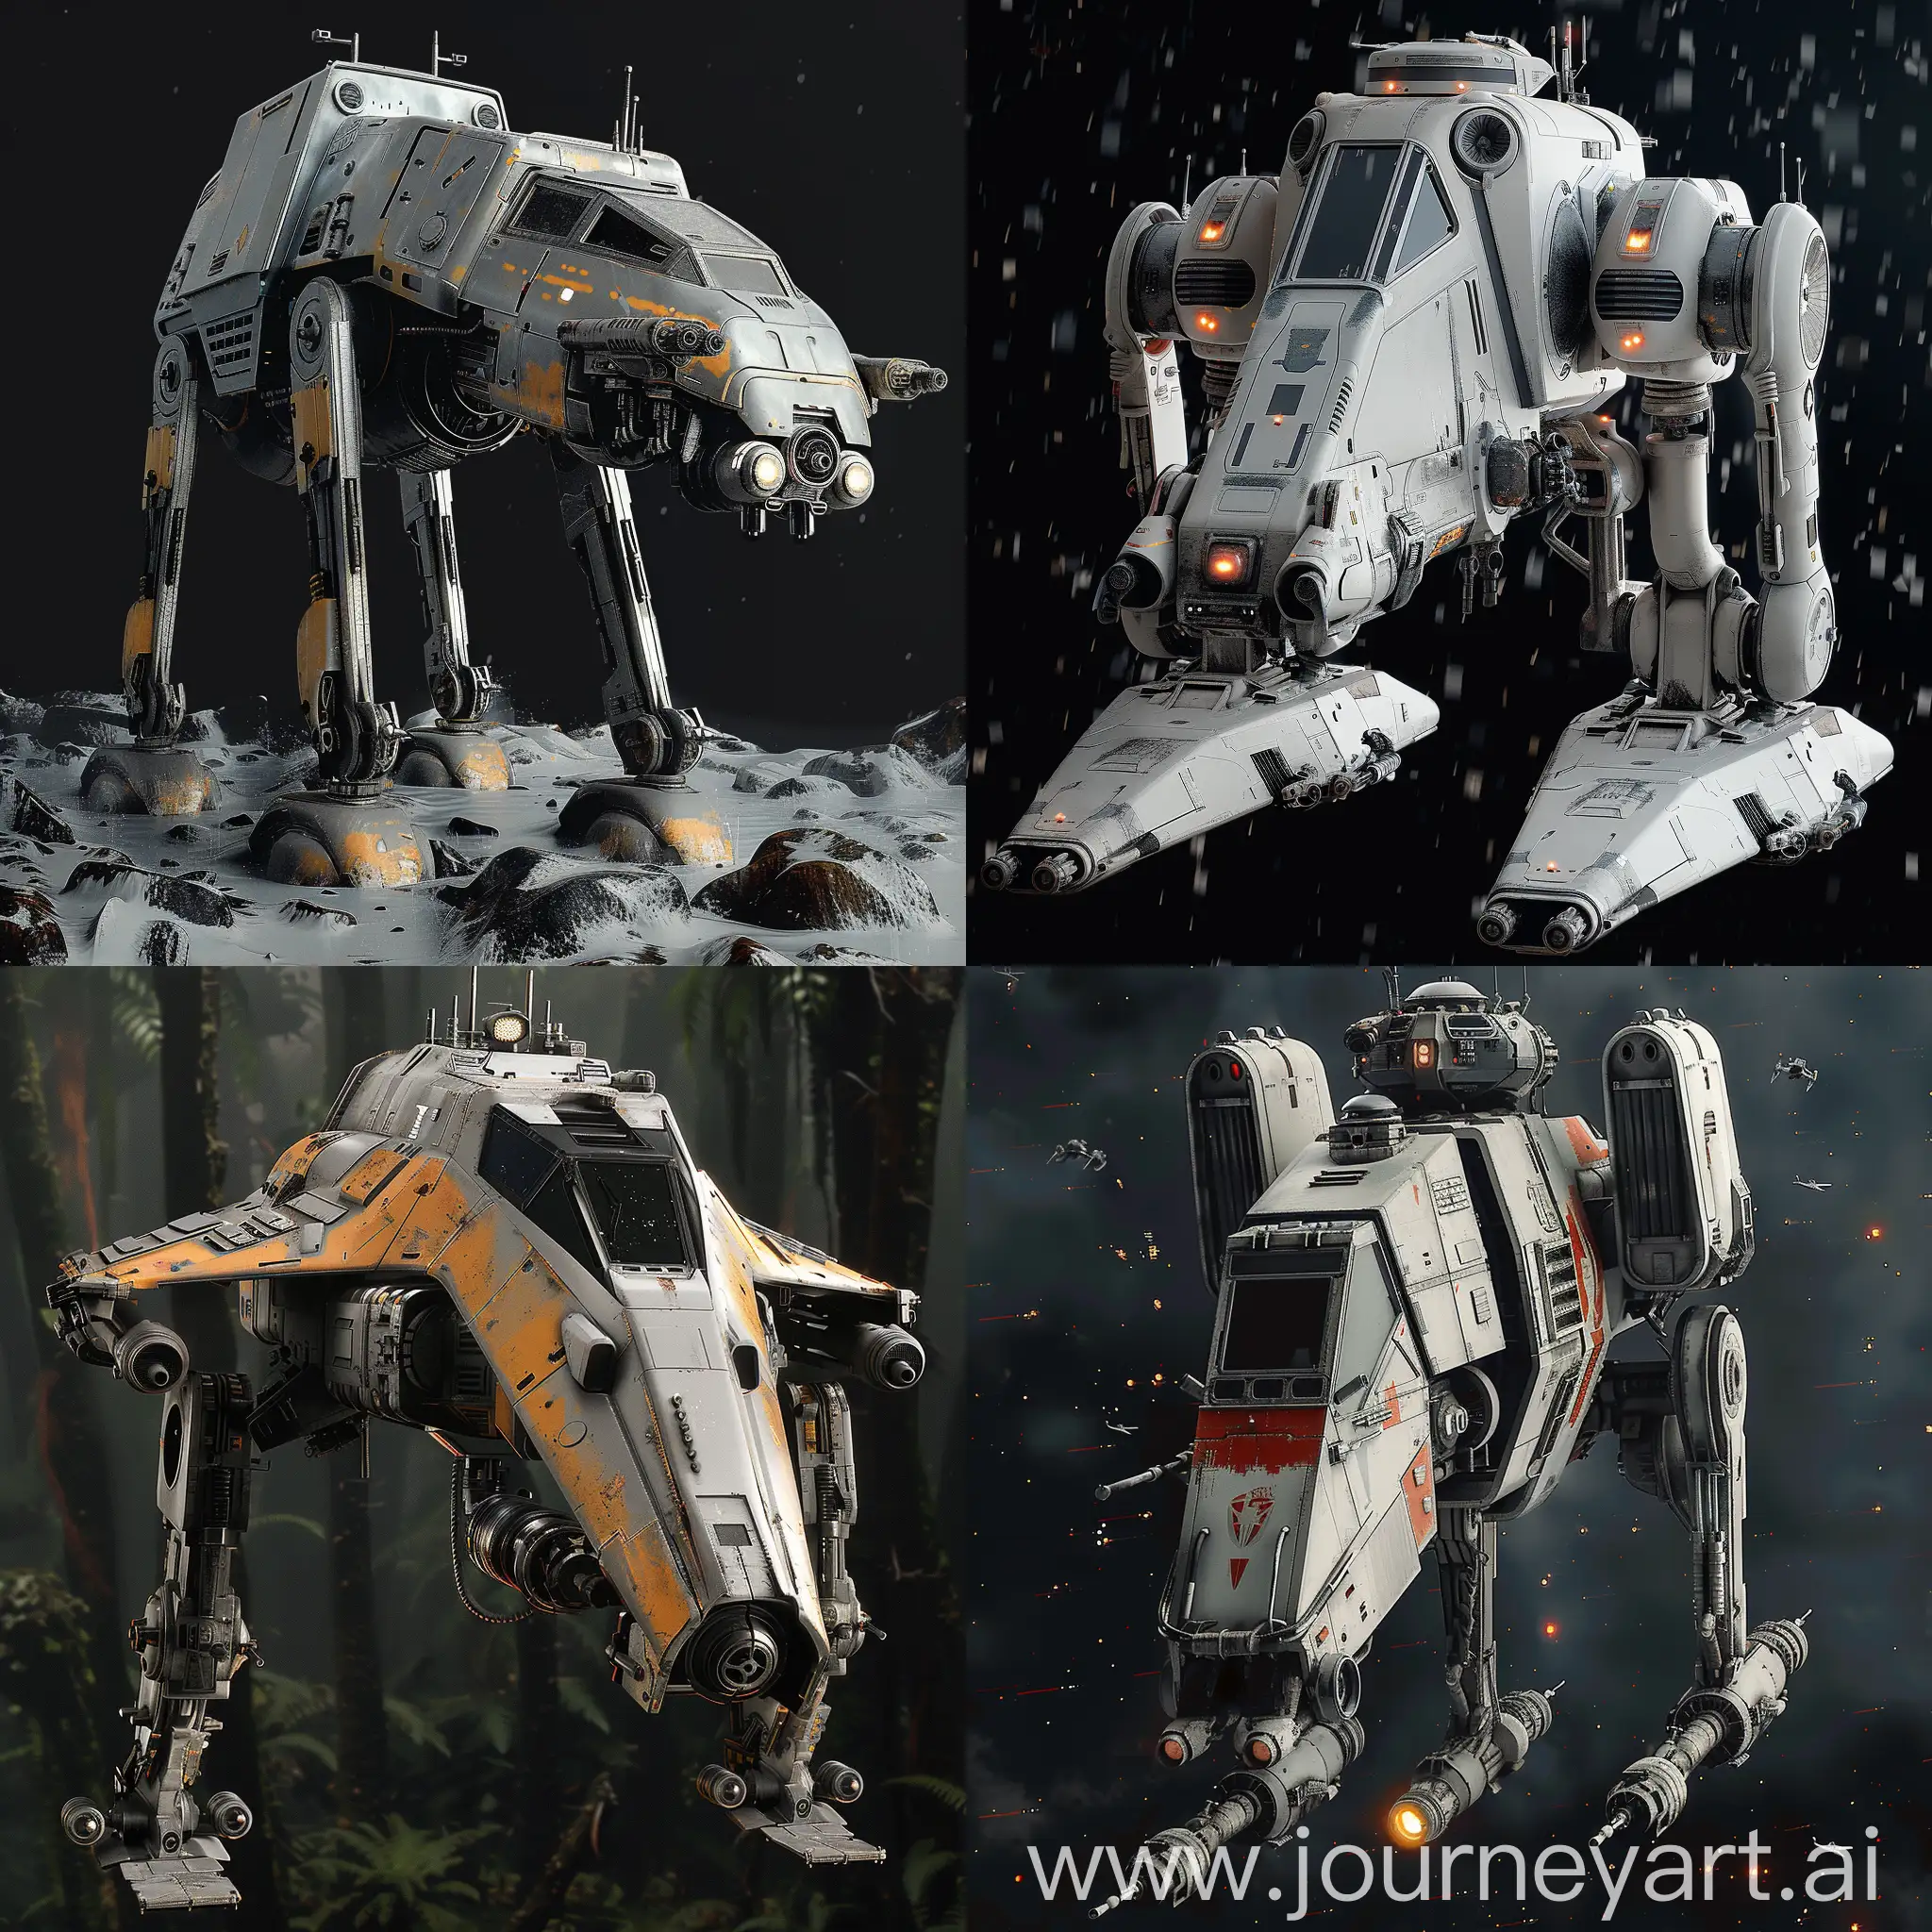 Futuristic:: Star Wars All Terrain Scout Transport https://static.wikia.nocookie.net/starwars/images/f/ff/ATST-SWBdice.png/revision/latest?cb=20230723050455, Advanced AI System, Energy Shield Technology, Stealth Mode, Adaptive Camouflage, Enhanced Maneuverability, Integrated Drone Swarm, Directed Energy Weapons, Directed Energy Weapons, Holographic Display Interface, Quantum Hyperdrive, Enhanced Sensors and Targeting Systems, Modular Weapon Mounts, Adaptive Suspension System, Integrated Communication Suite, Environmental Control Systems, Enhanced Armor and Durability, Autonomous Driving Capabilities, Energy-Efficient Propulsion System, Multi-Function Cockpit Display, Remote Control and Drone Integration, octane render --stylize 1000